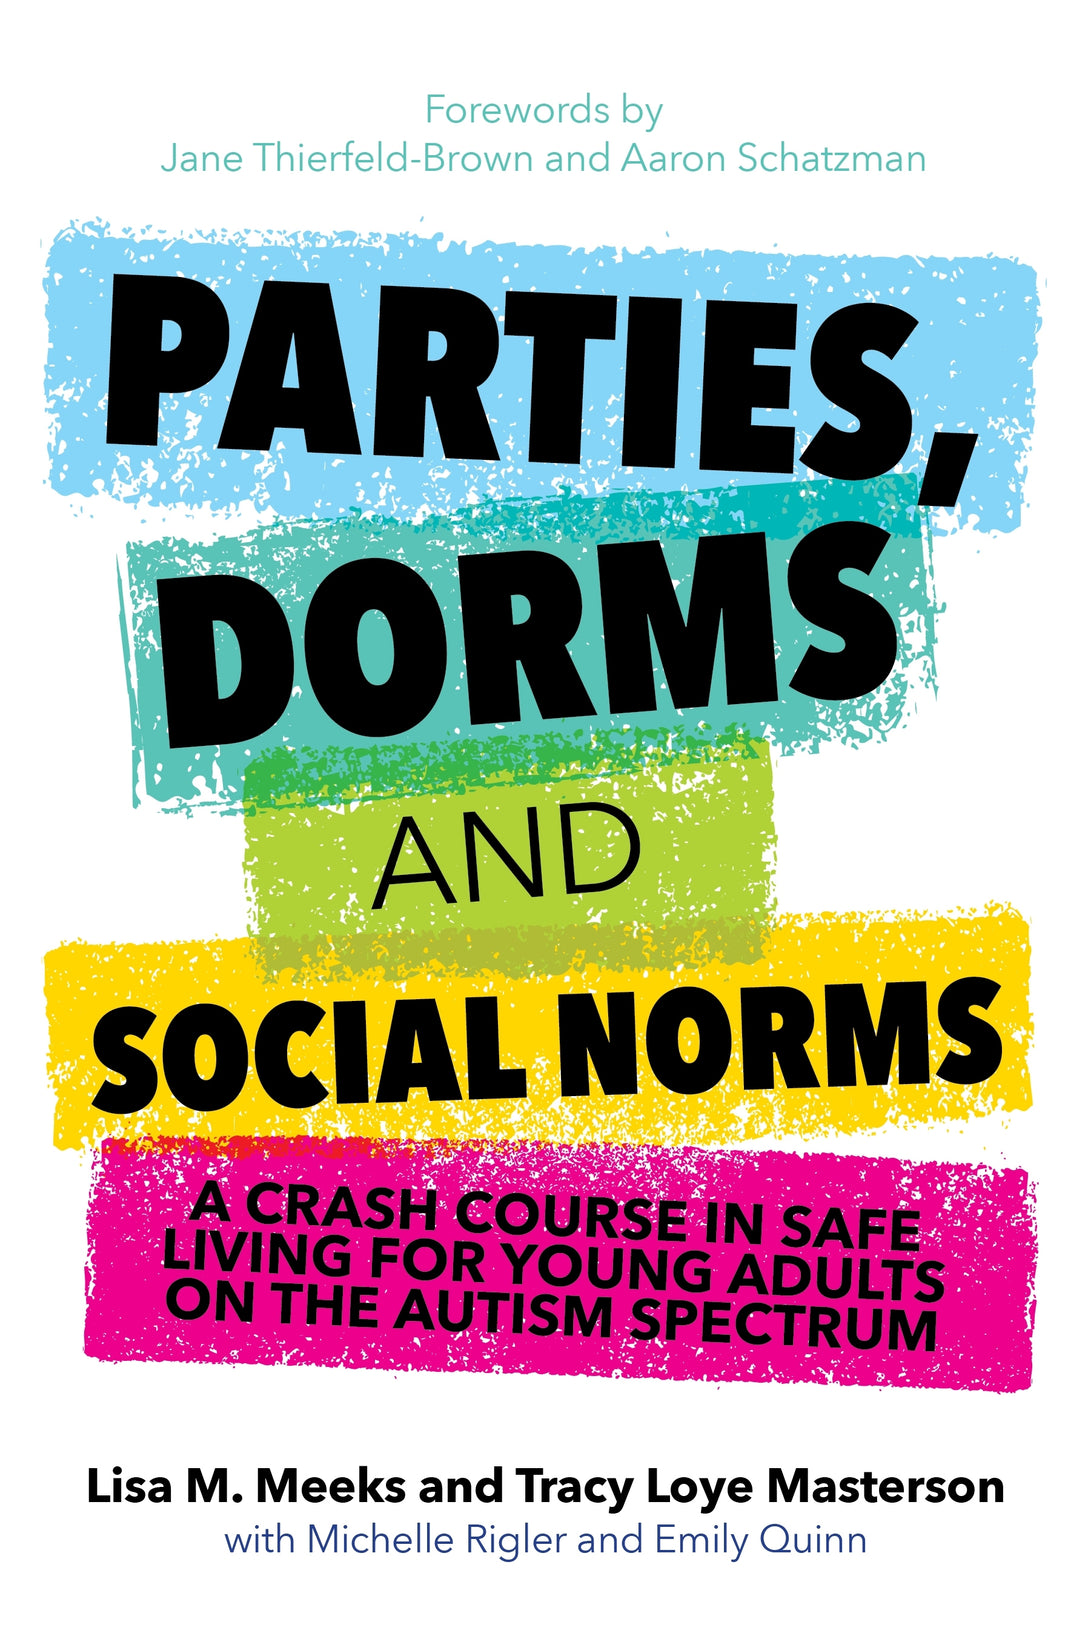 Parties, Dorms and Social Norms by Lisa M. Meeks, Tracy Loye Masterson, Amy Rutherford, Jane Thierfeld-Brown, Aaron Schatzman